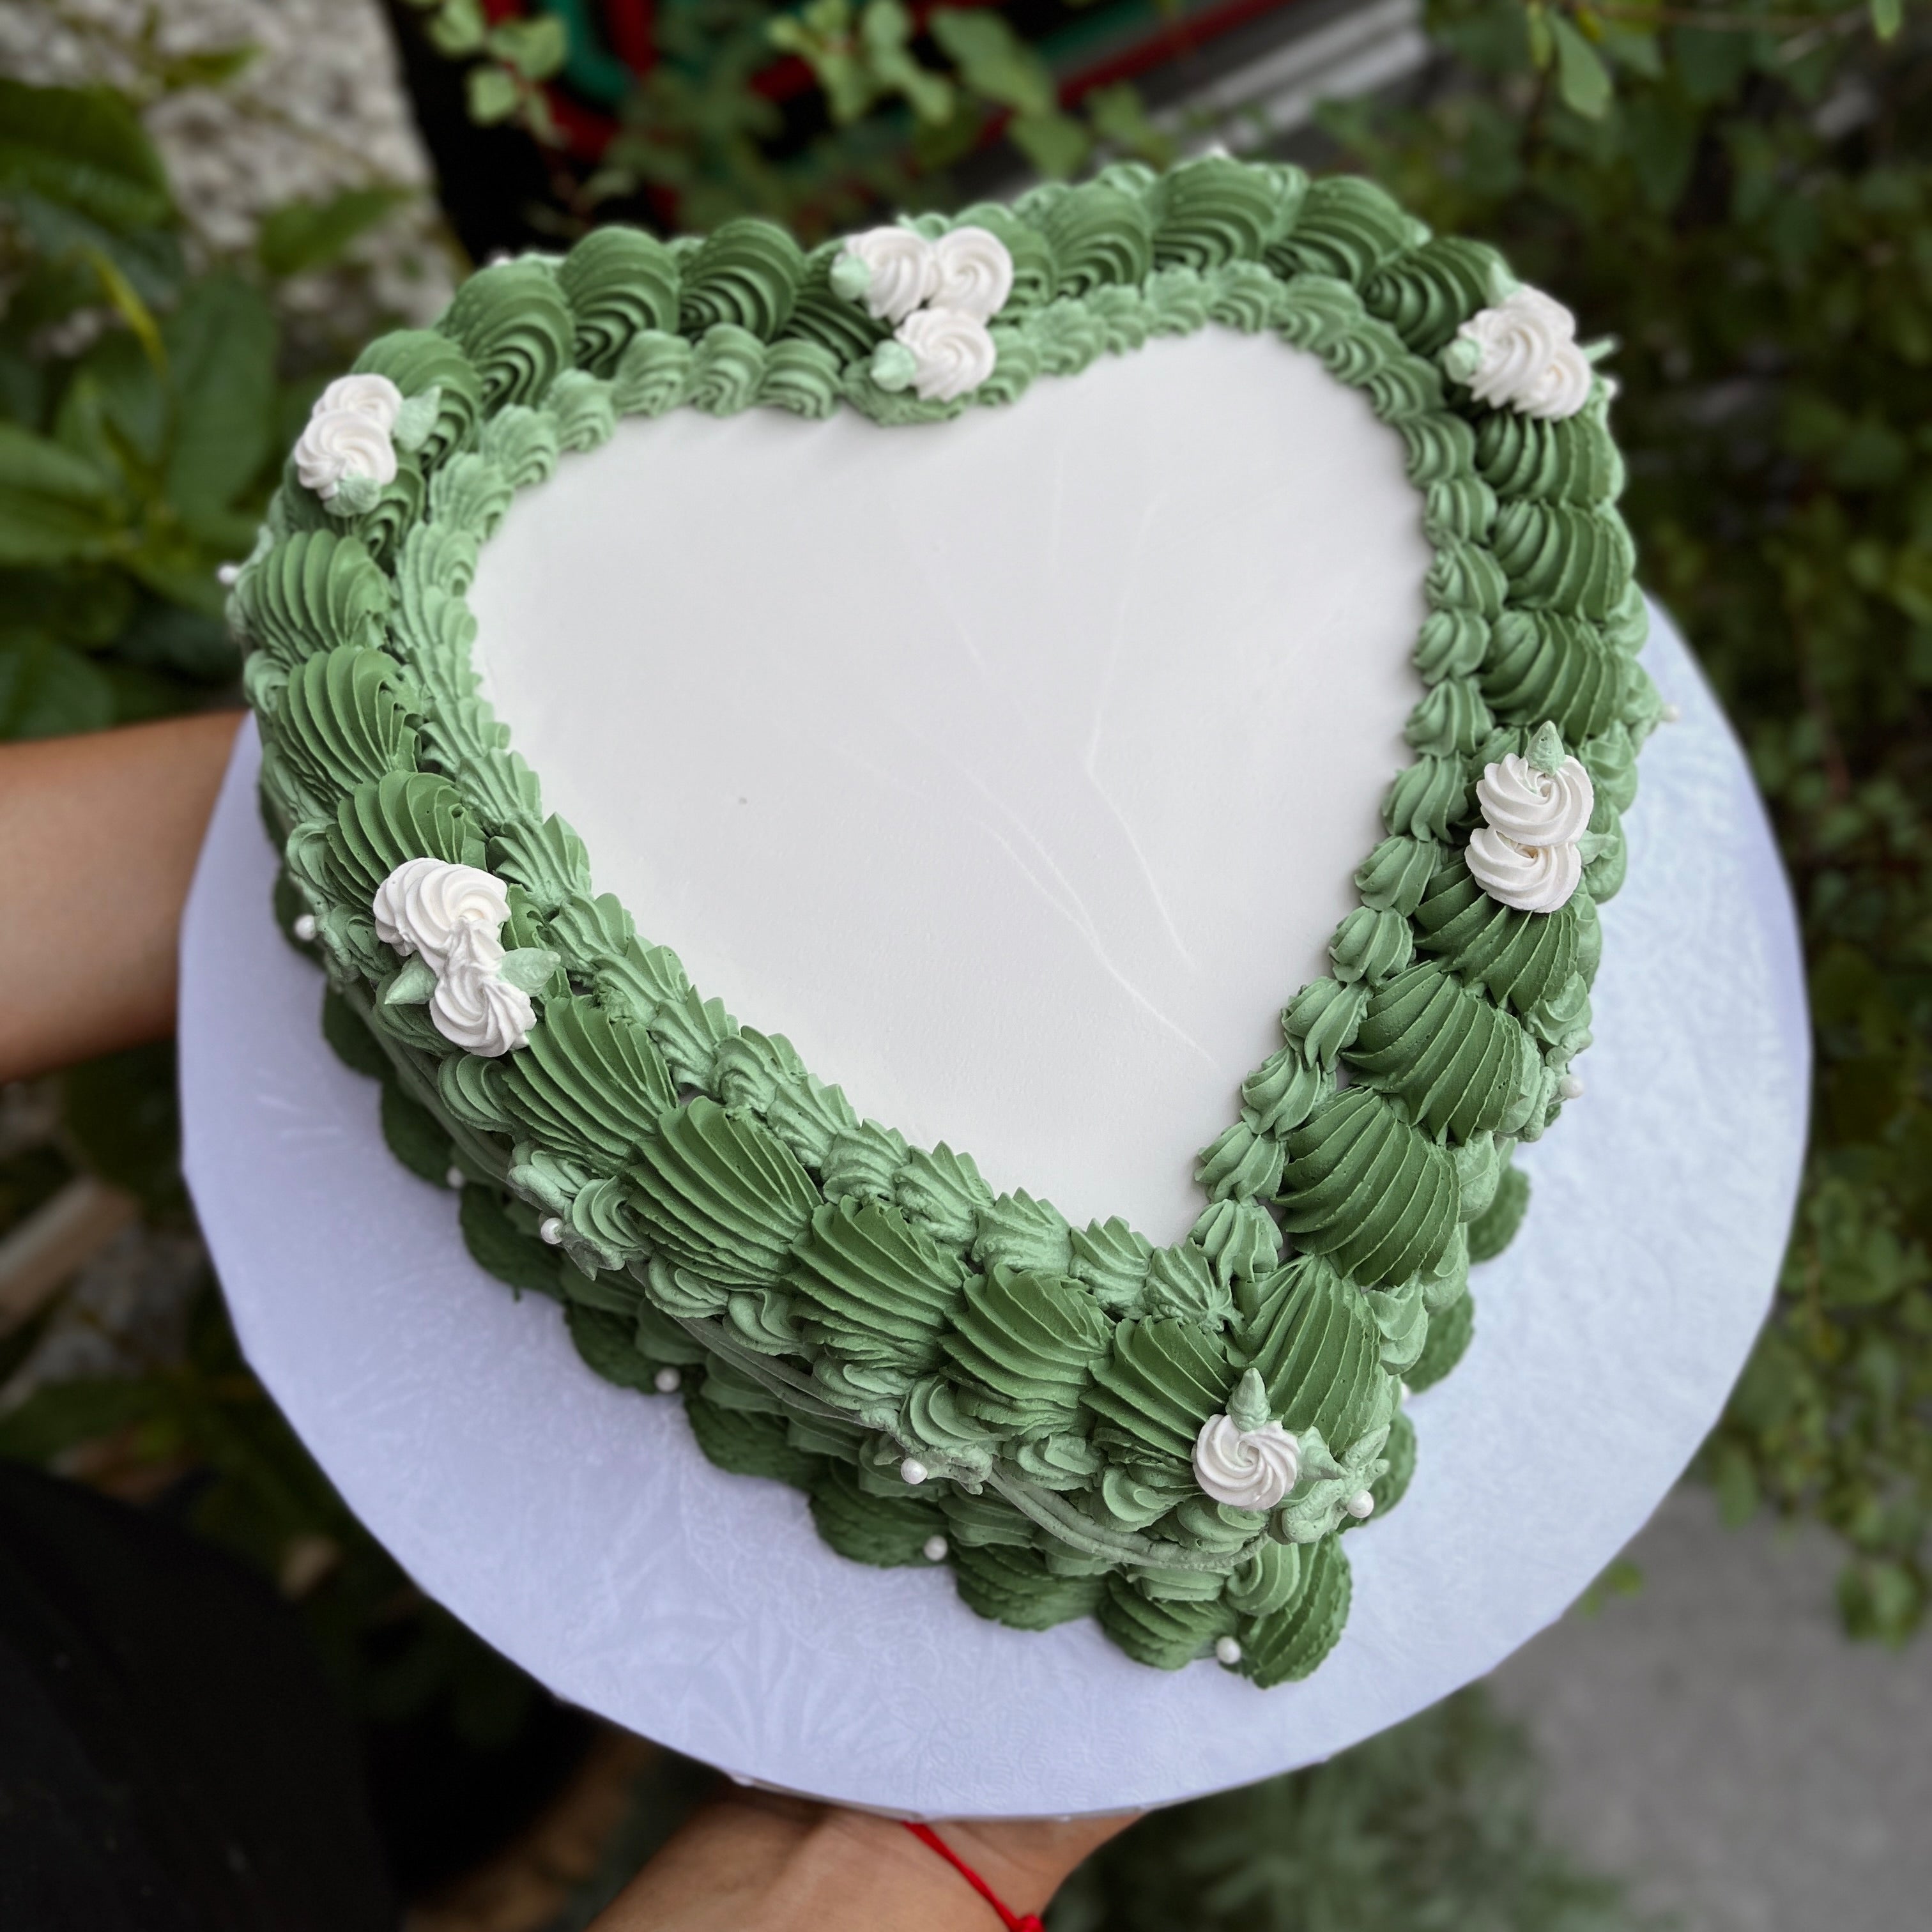 Delicious heart shape cherry cake with mascarpone cheese and jelly. |  CanStock